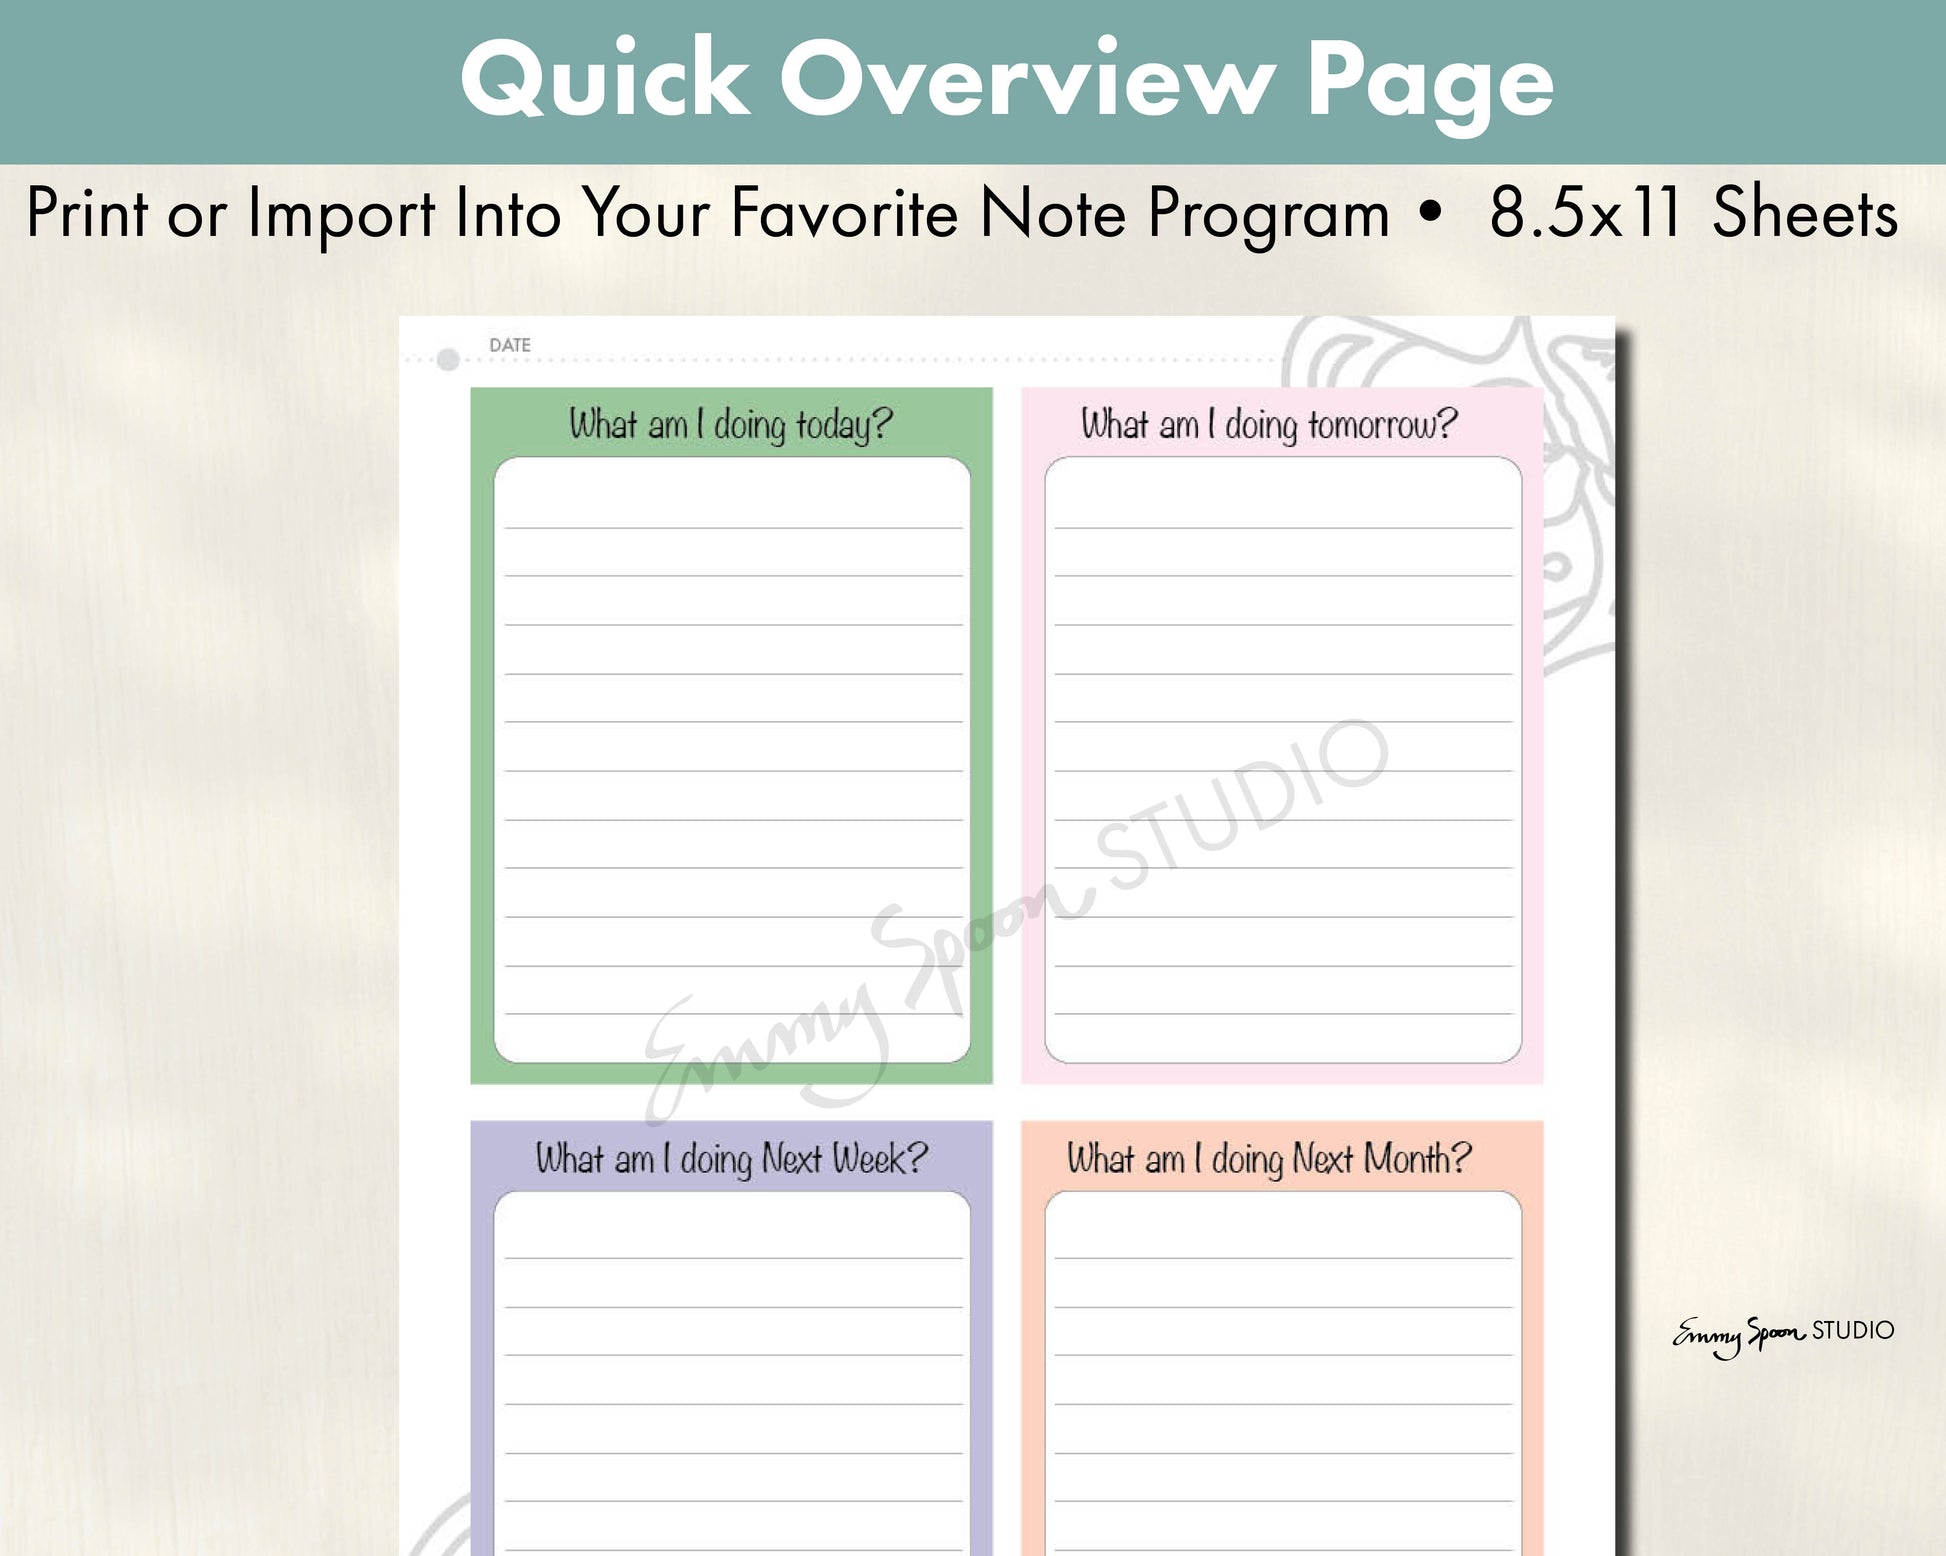 Quick Overview Page - Print or Import Into Your Favorite Note Program - 8.5x 11 Sheets by Emmy Spoon Studio